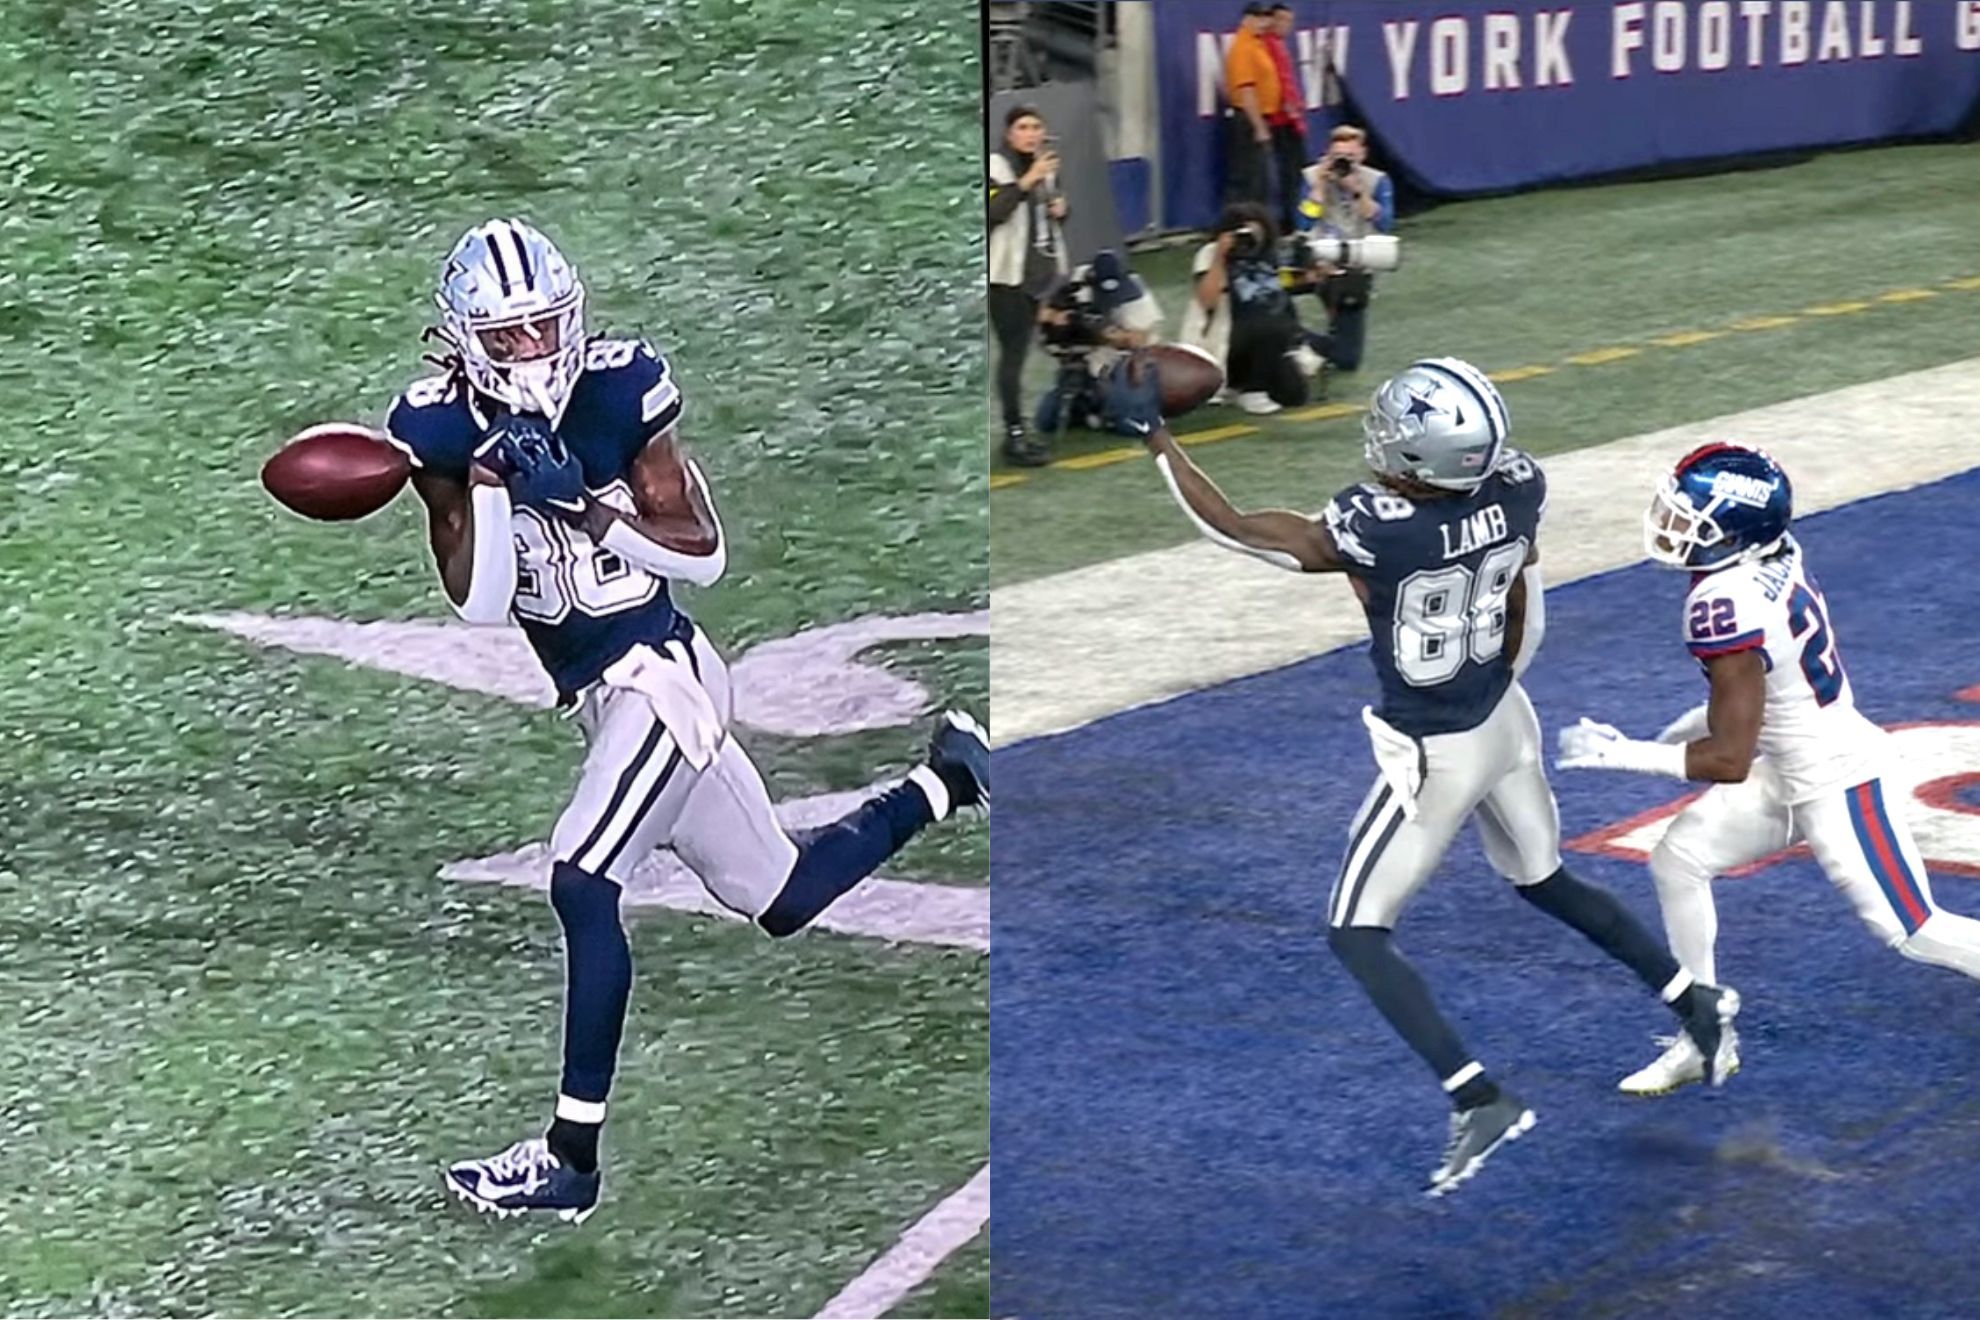 Ceedee Lamb took Cowboys fans on a rollercoaster ride in New York. He went from dropping a perfectly thrown ball by Cooper Rush to making an incredible one-handed grab for the game winning TD. -ABC